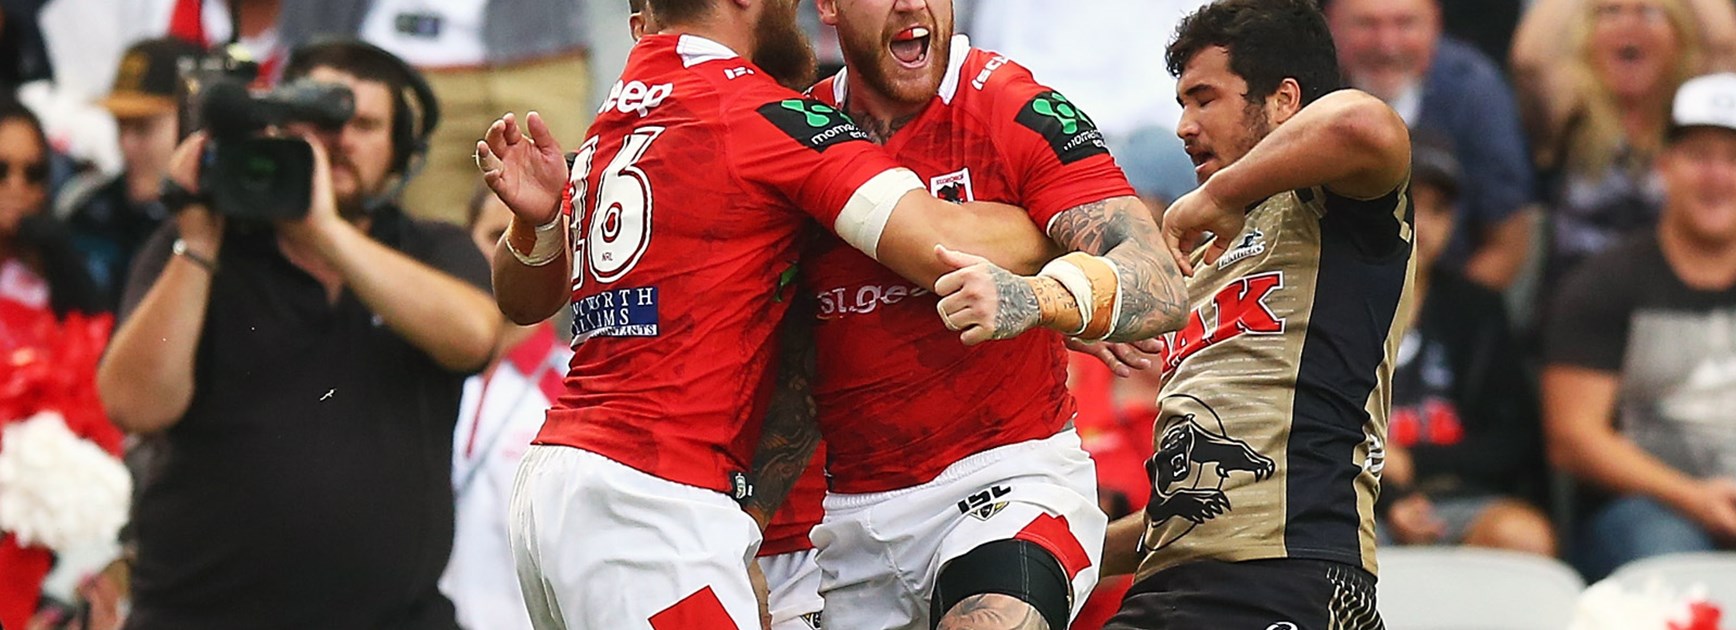 Josh Dugan celebrates his try against the Panthers in Round 4.